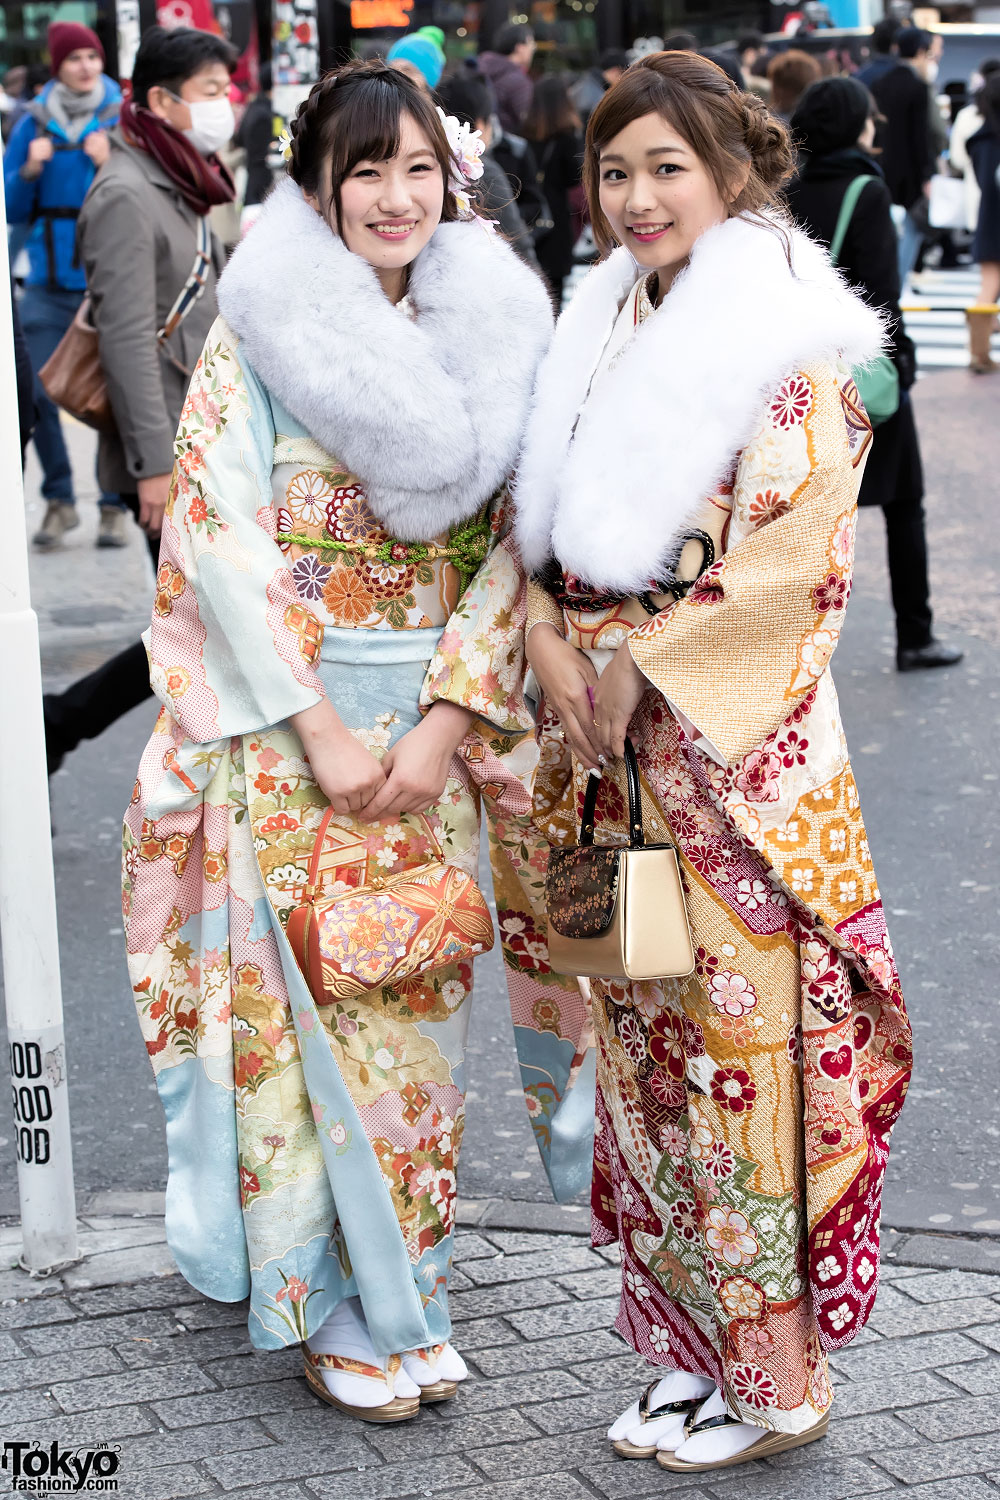 Coming of Age Day in Japan 2015 - Kimono Pictures